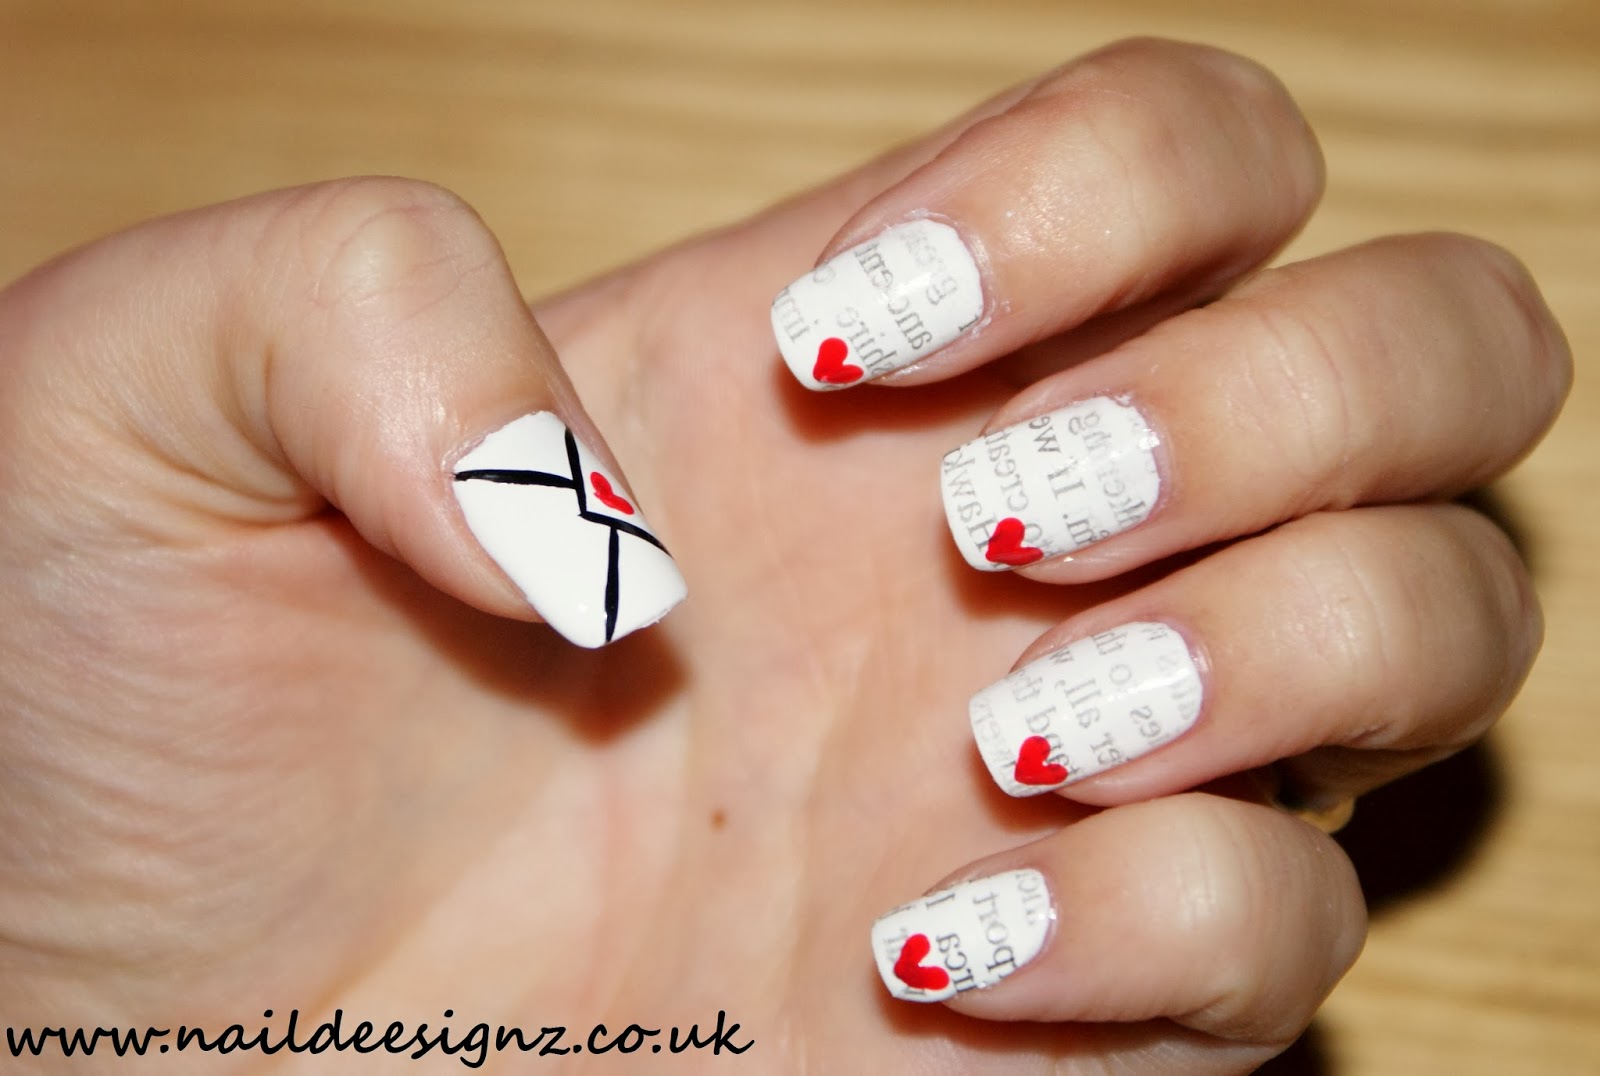 Letter Nail Art Designs - wide 1